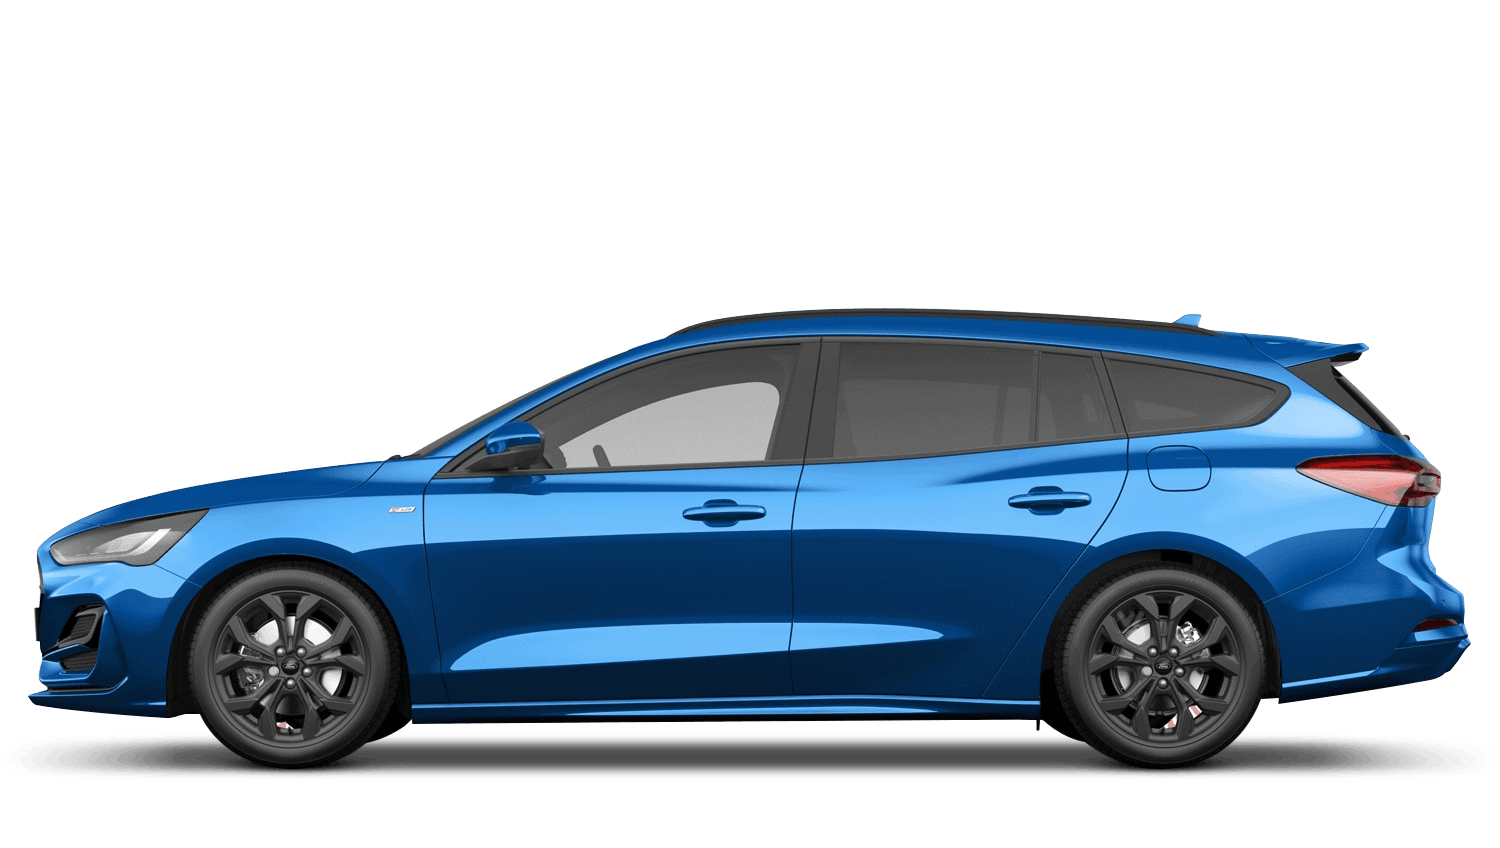 Ford Focus exterior - Side Profile